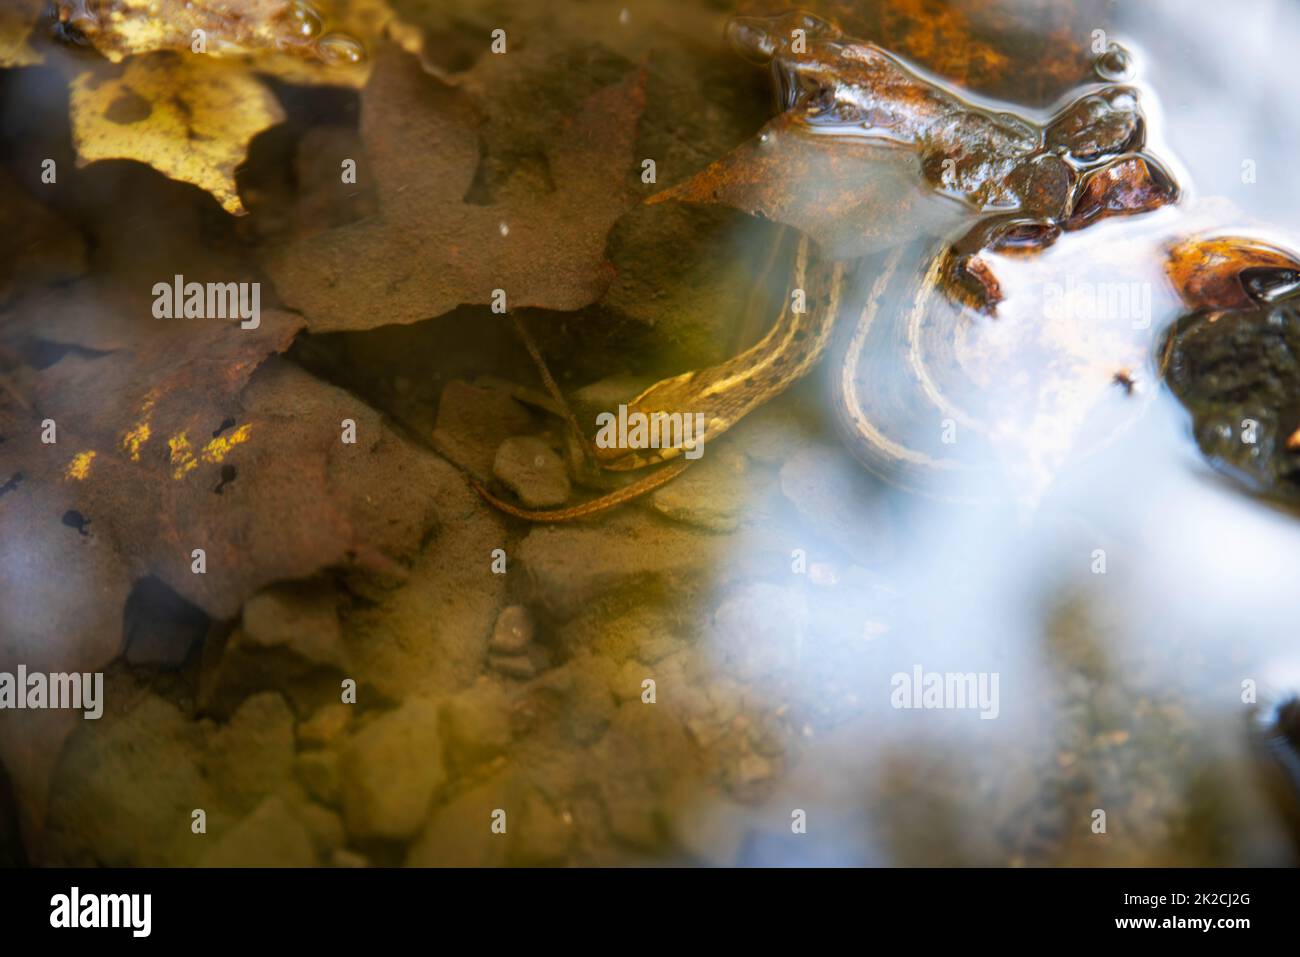 A garter snake curled underwater on creek bed sky reflected Stock Photo